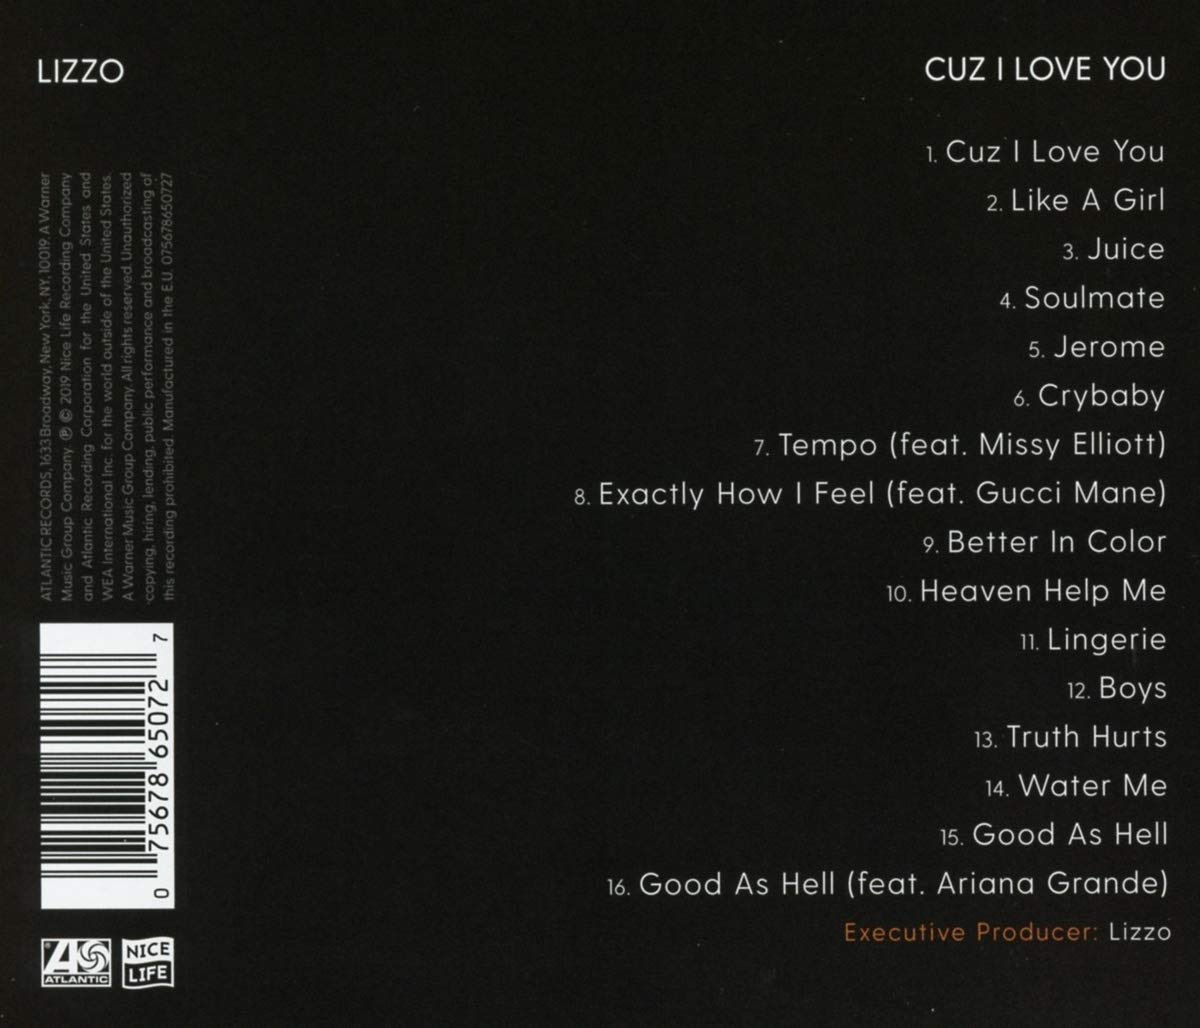 top 3 from cuz i love you by lizzo